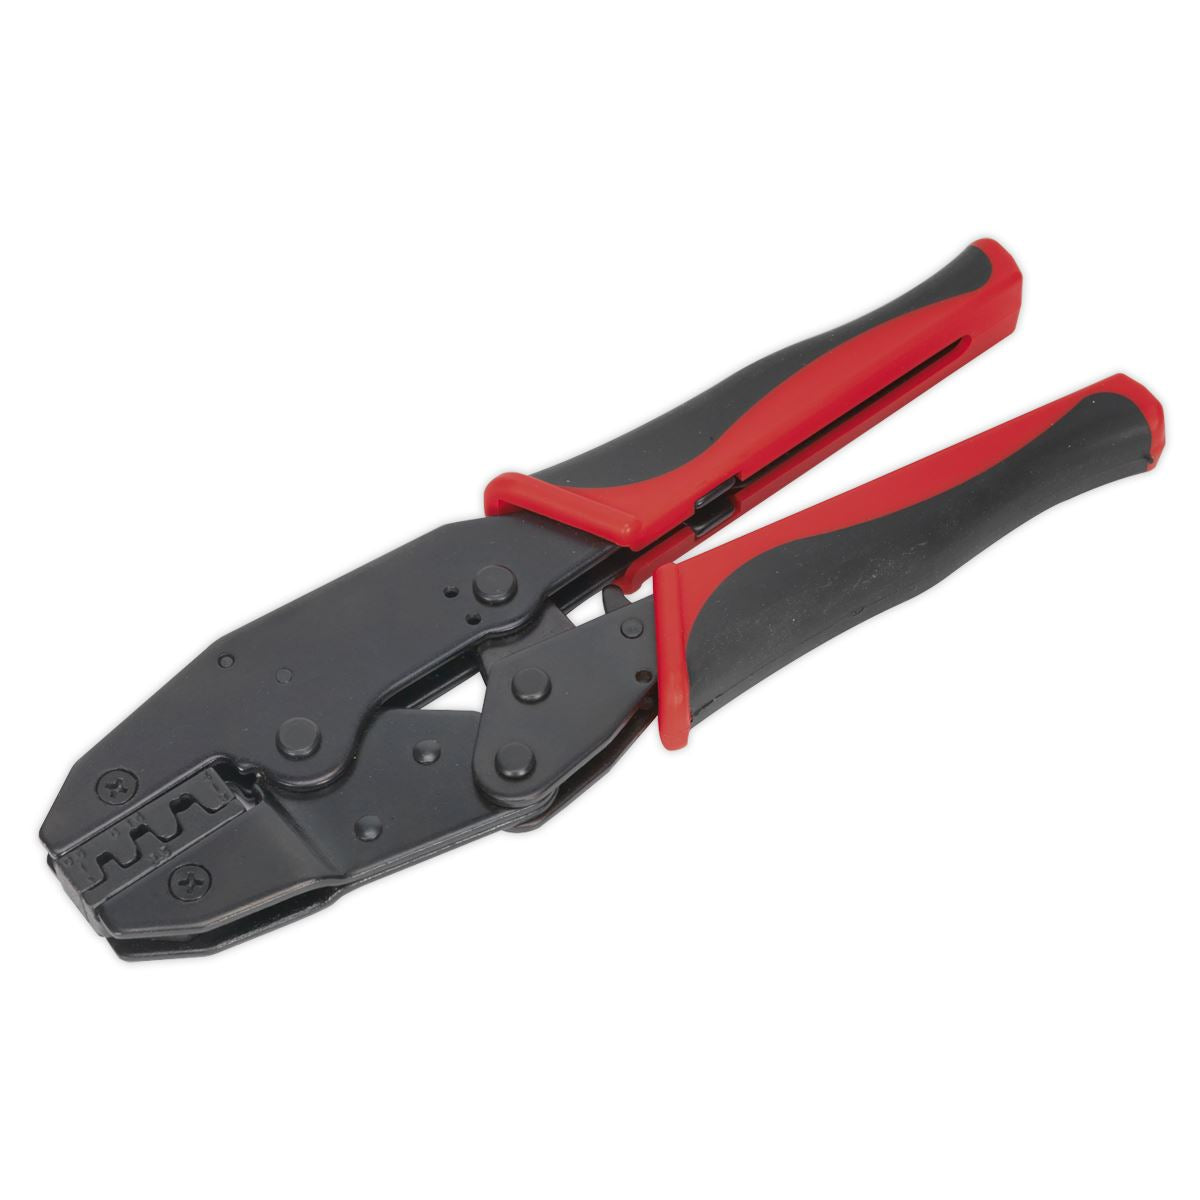 Sealey Ratchet Crimping Tool Non-Insulated Terminals